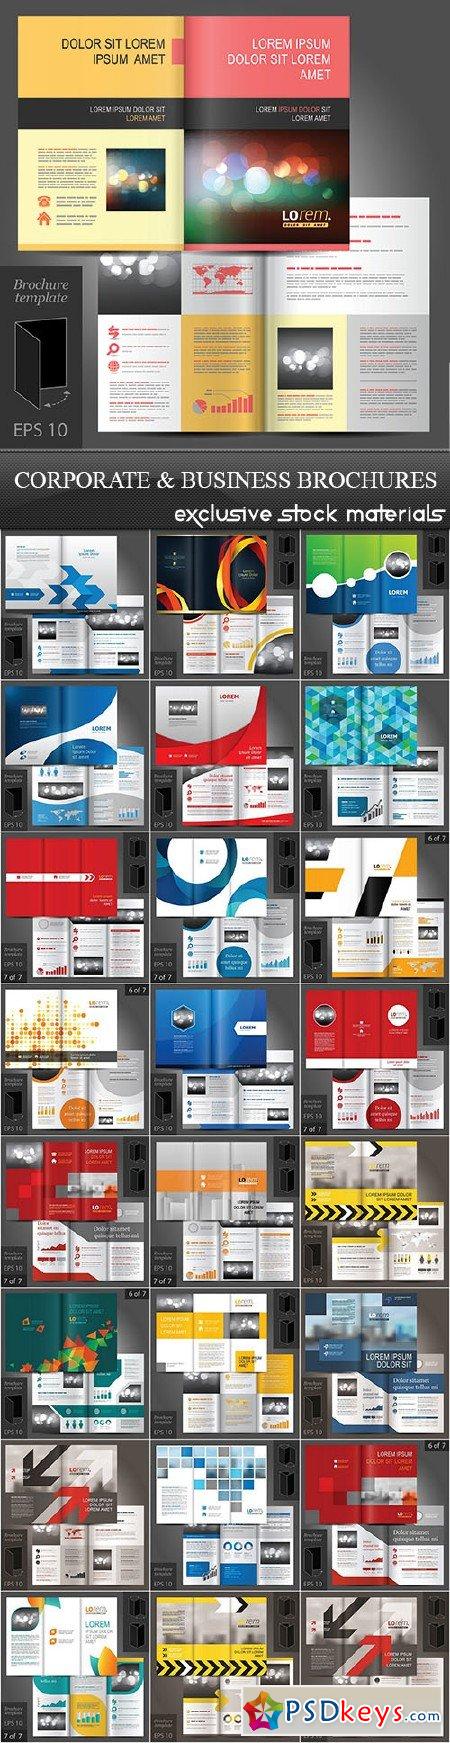 Corporate & Business Brochures, 25xEPS